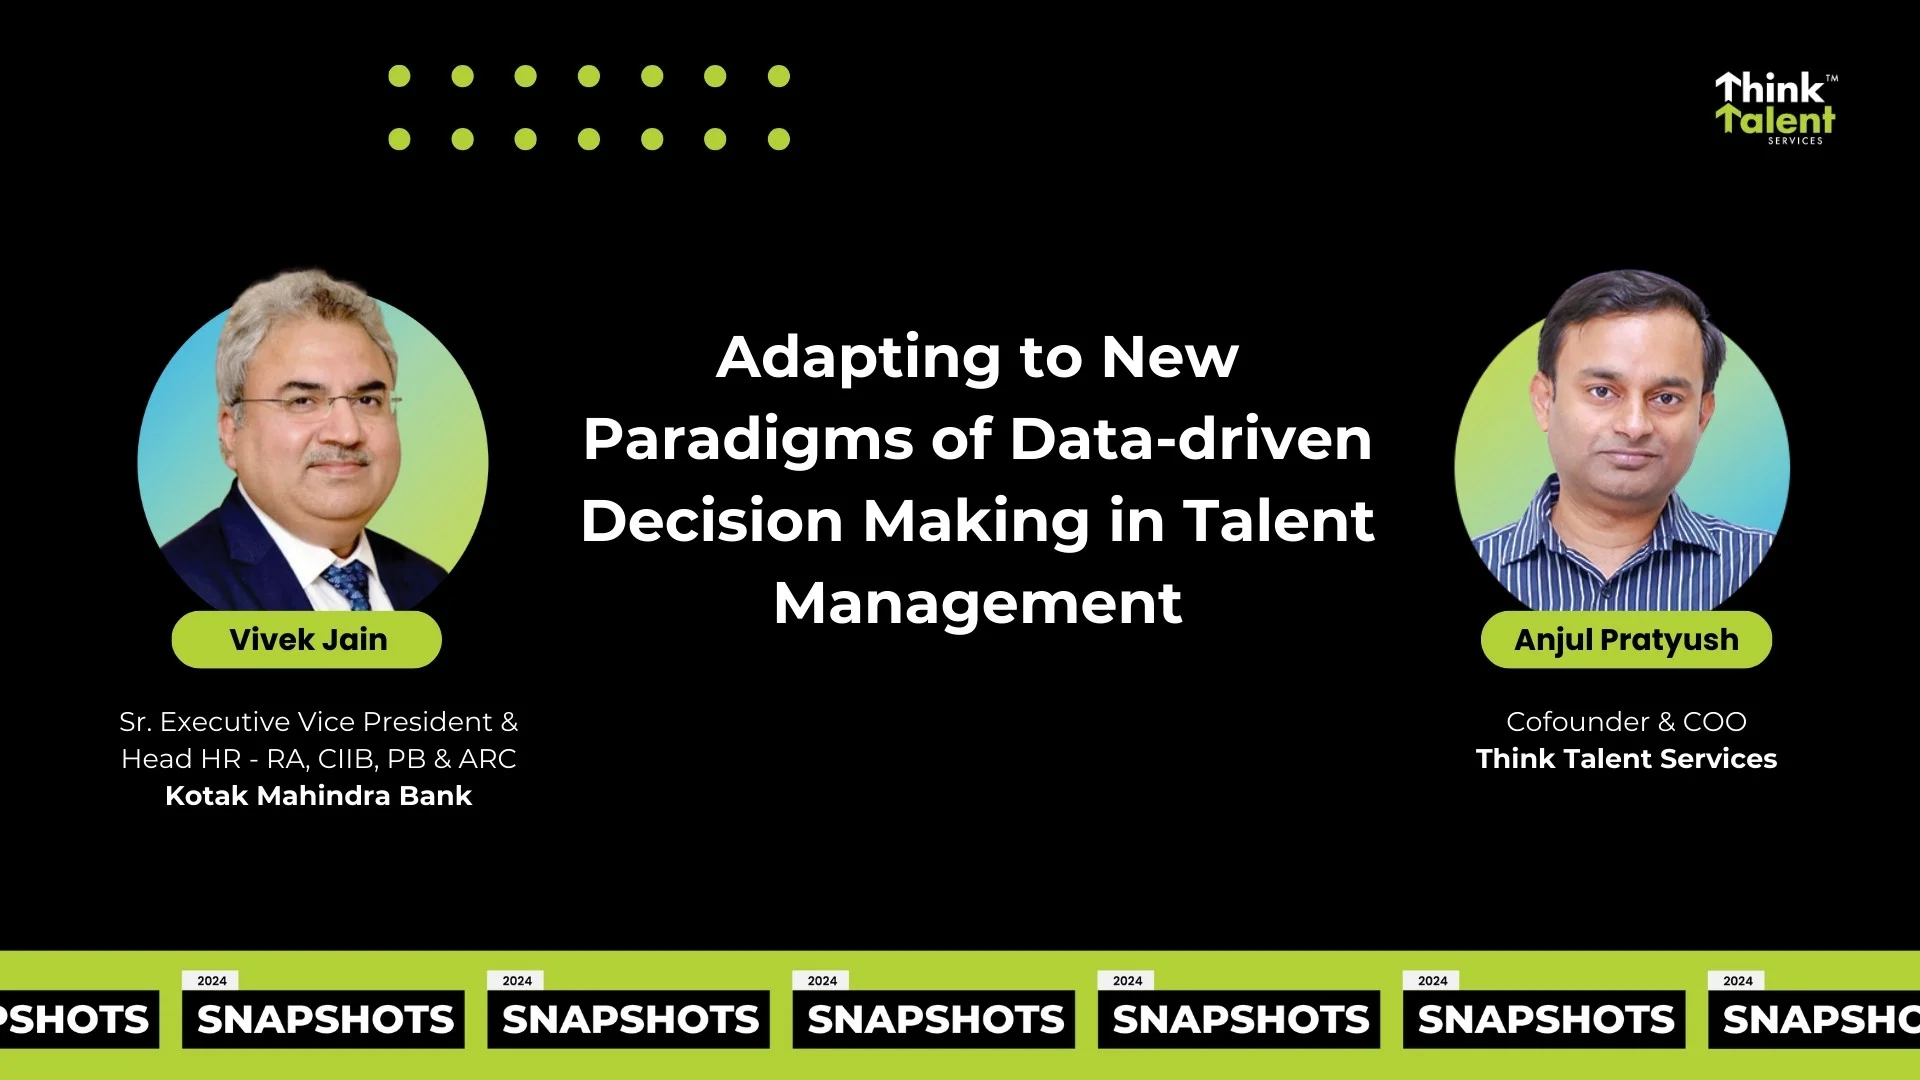 Adapting to New Paradigms of Data-driven Decision-making in Talent Management